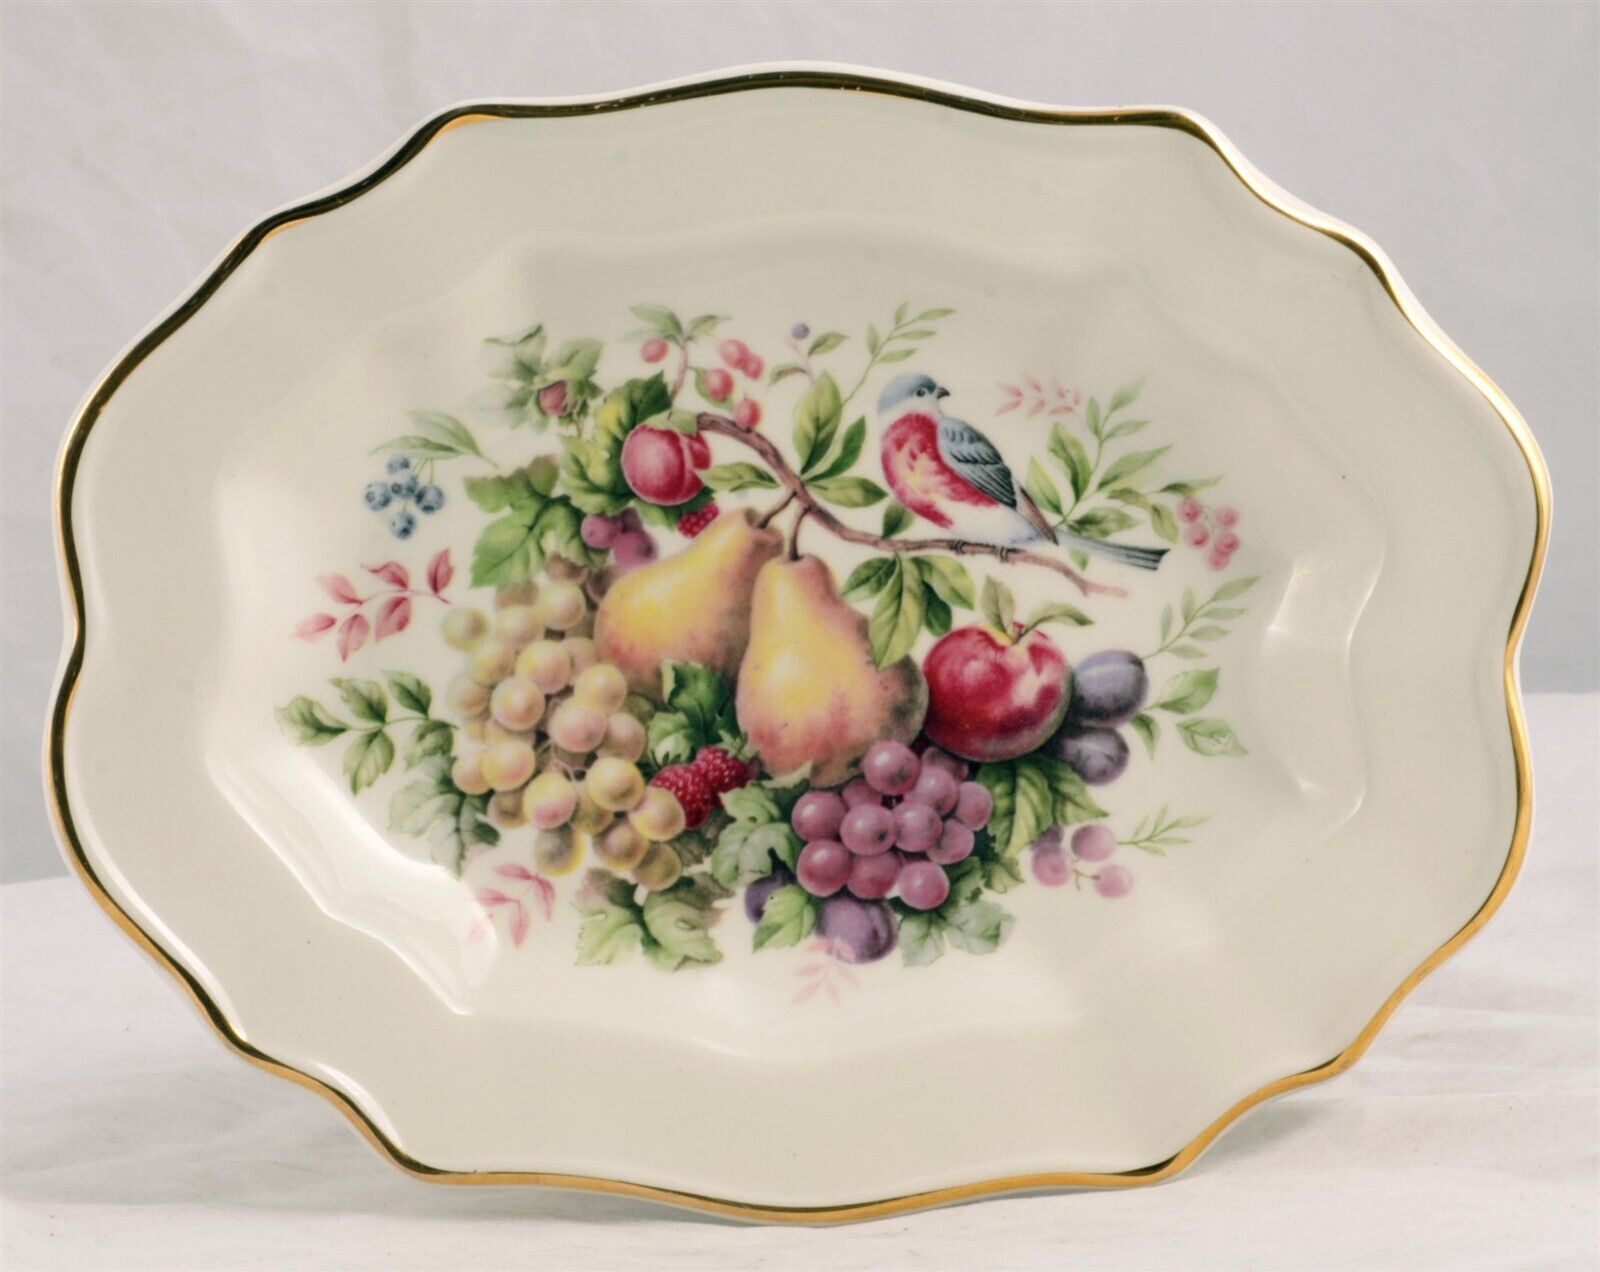 Decorative AVON Plate Vintage 1976 Hand Decorated 22K Gold Trim made in England - $17.65